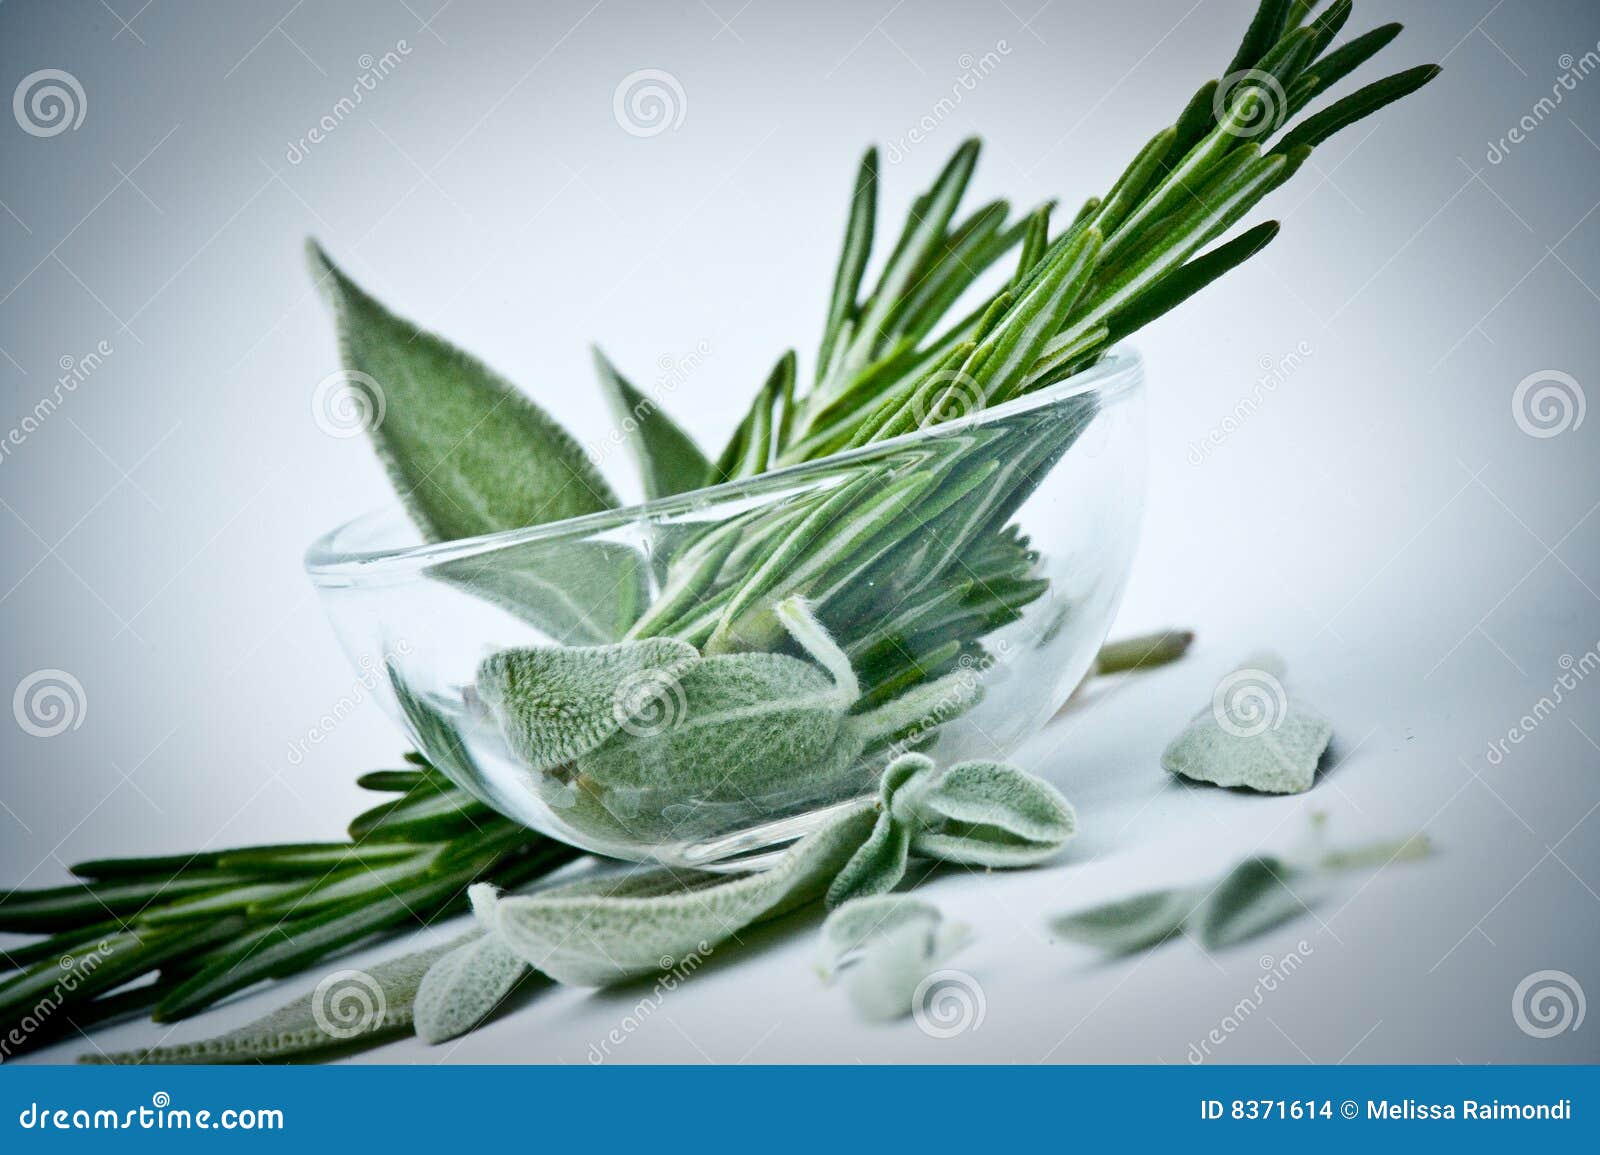 rosemary and sage